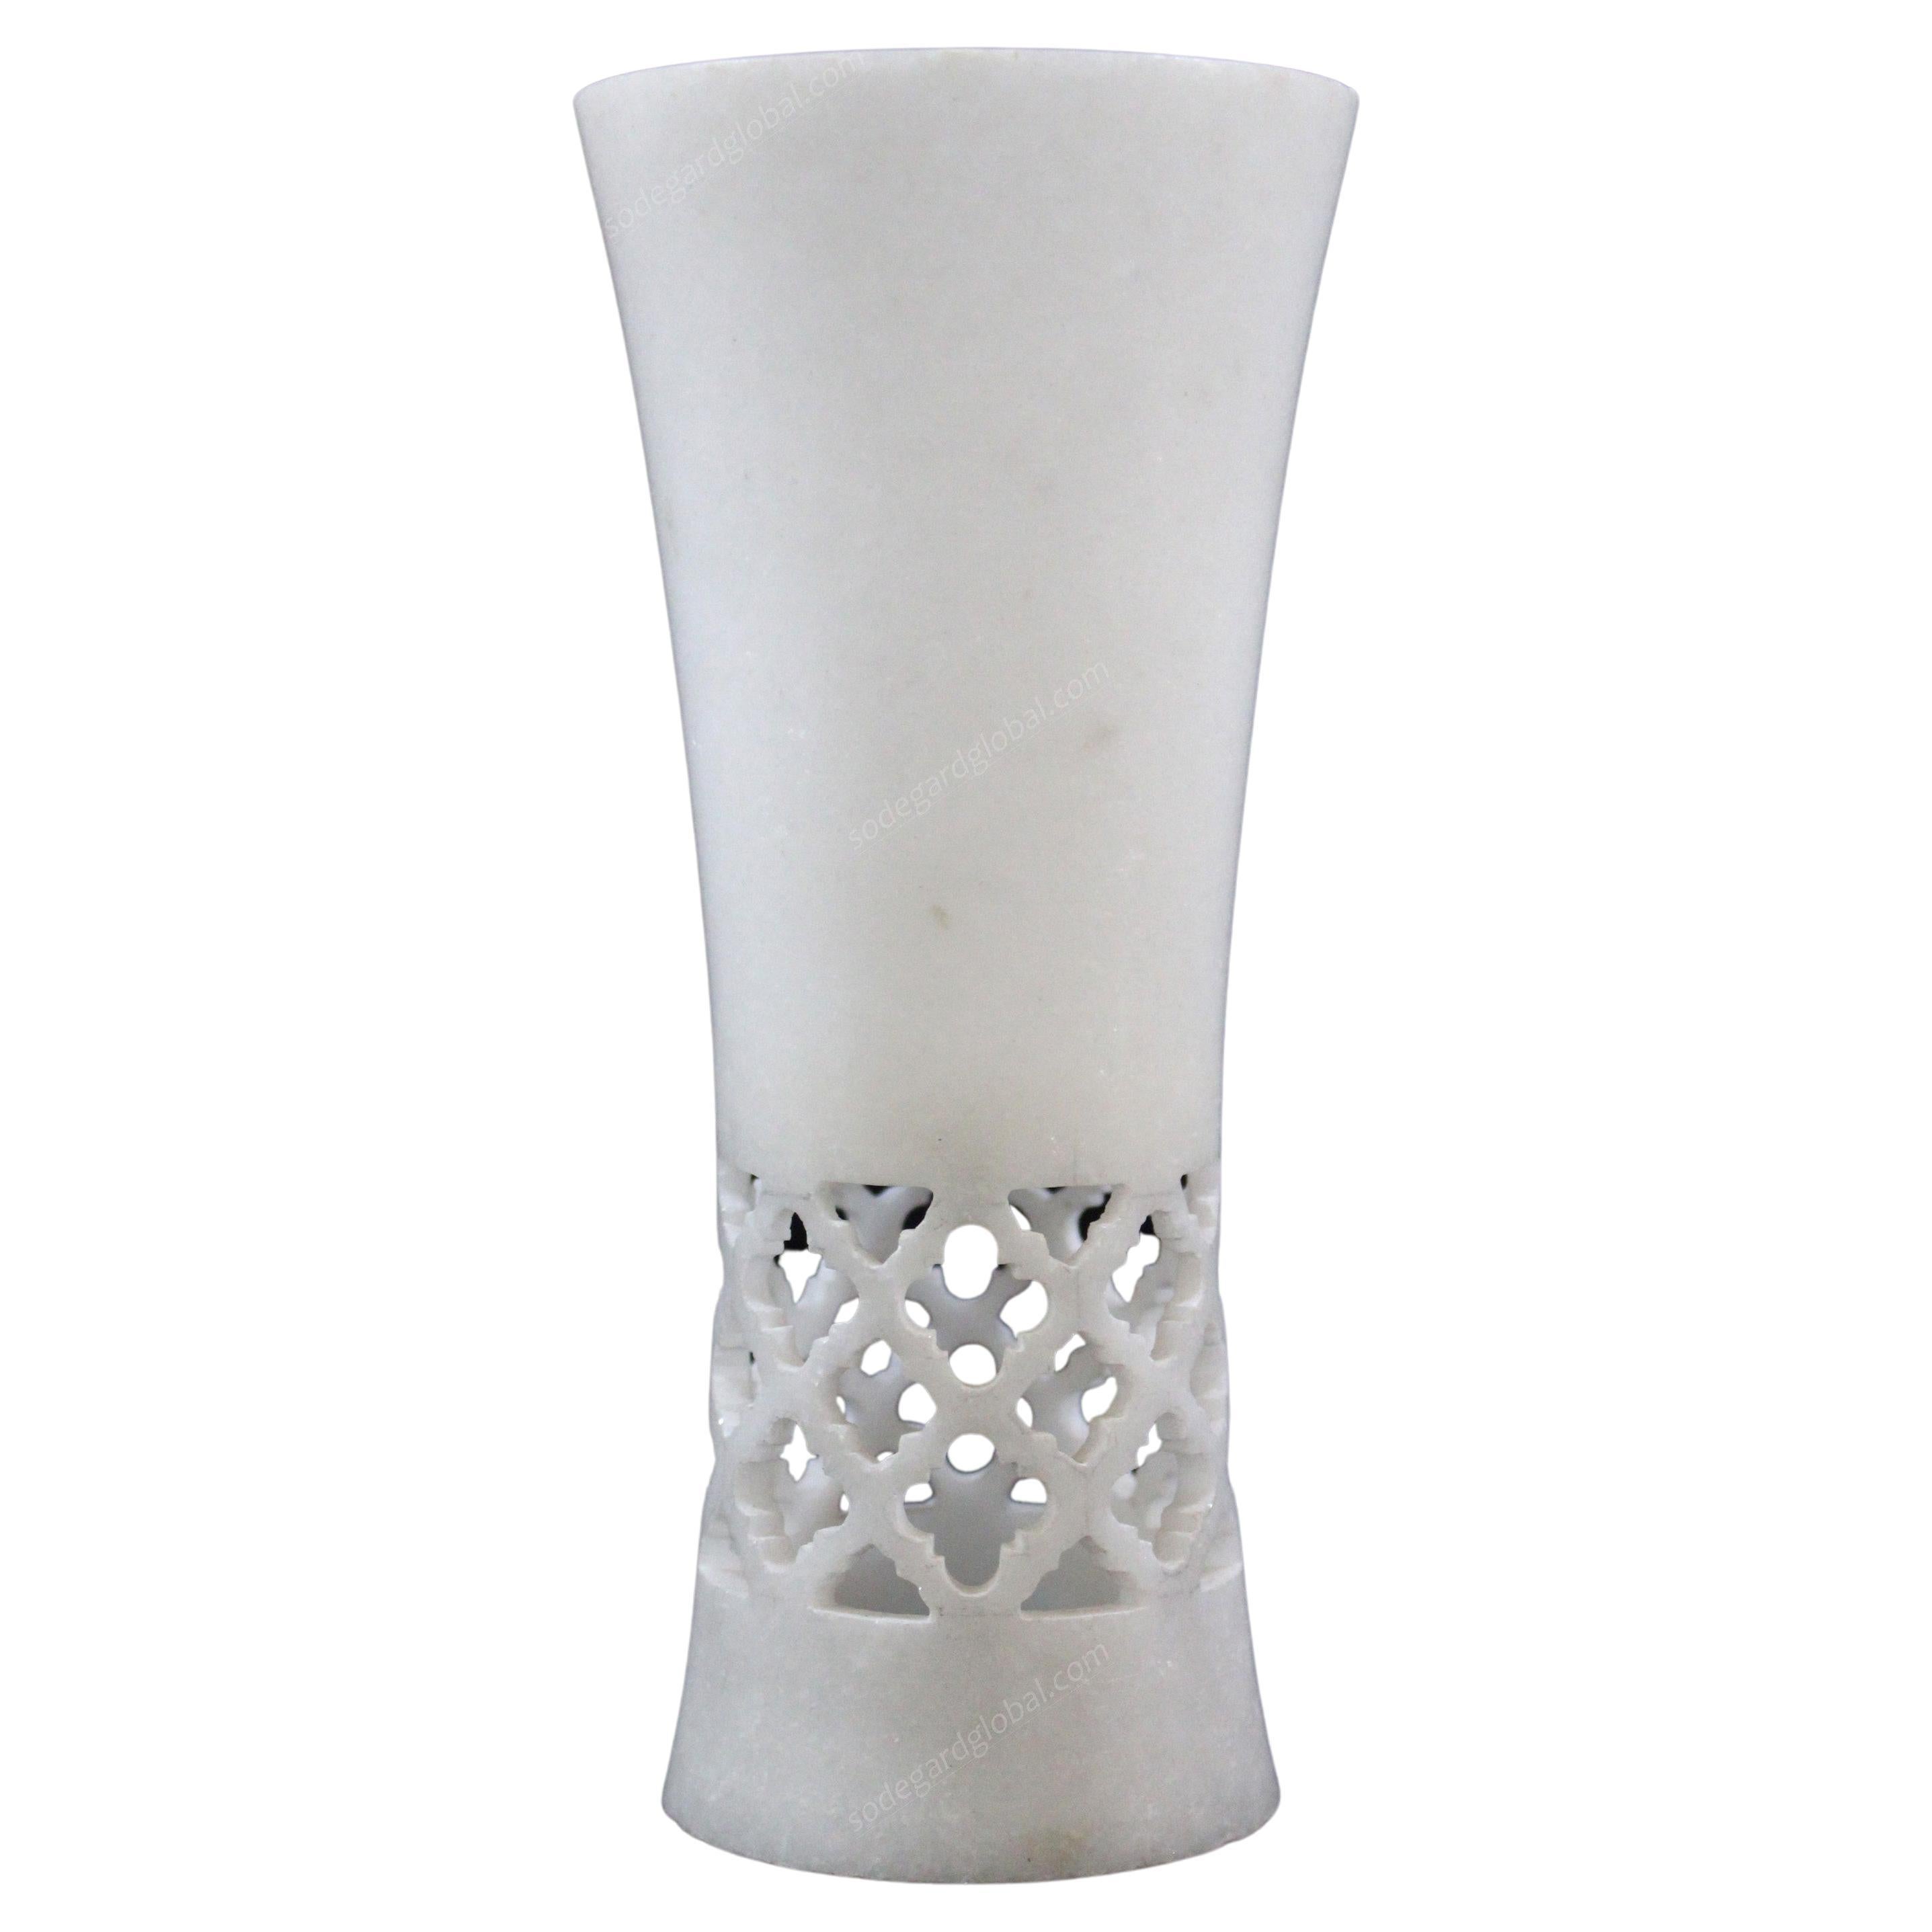 Goblet in white marble handcrafted in India by Stephanie Odegard

Size- 3